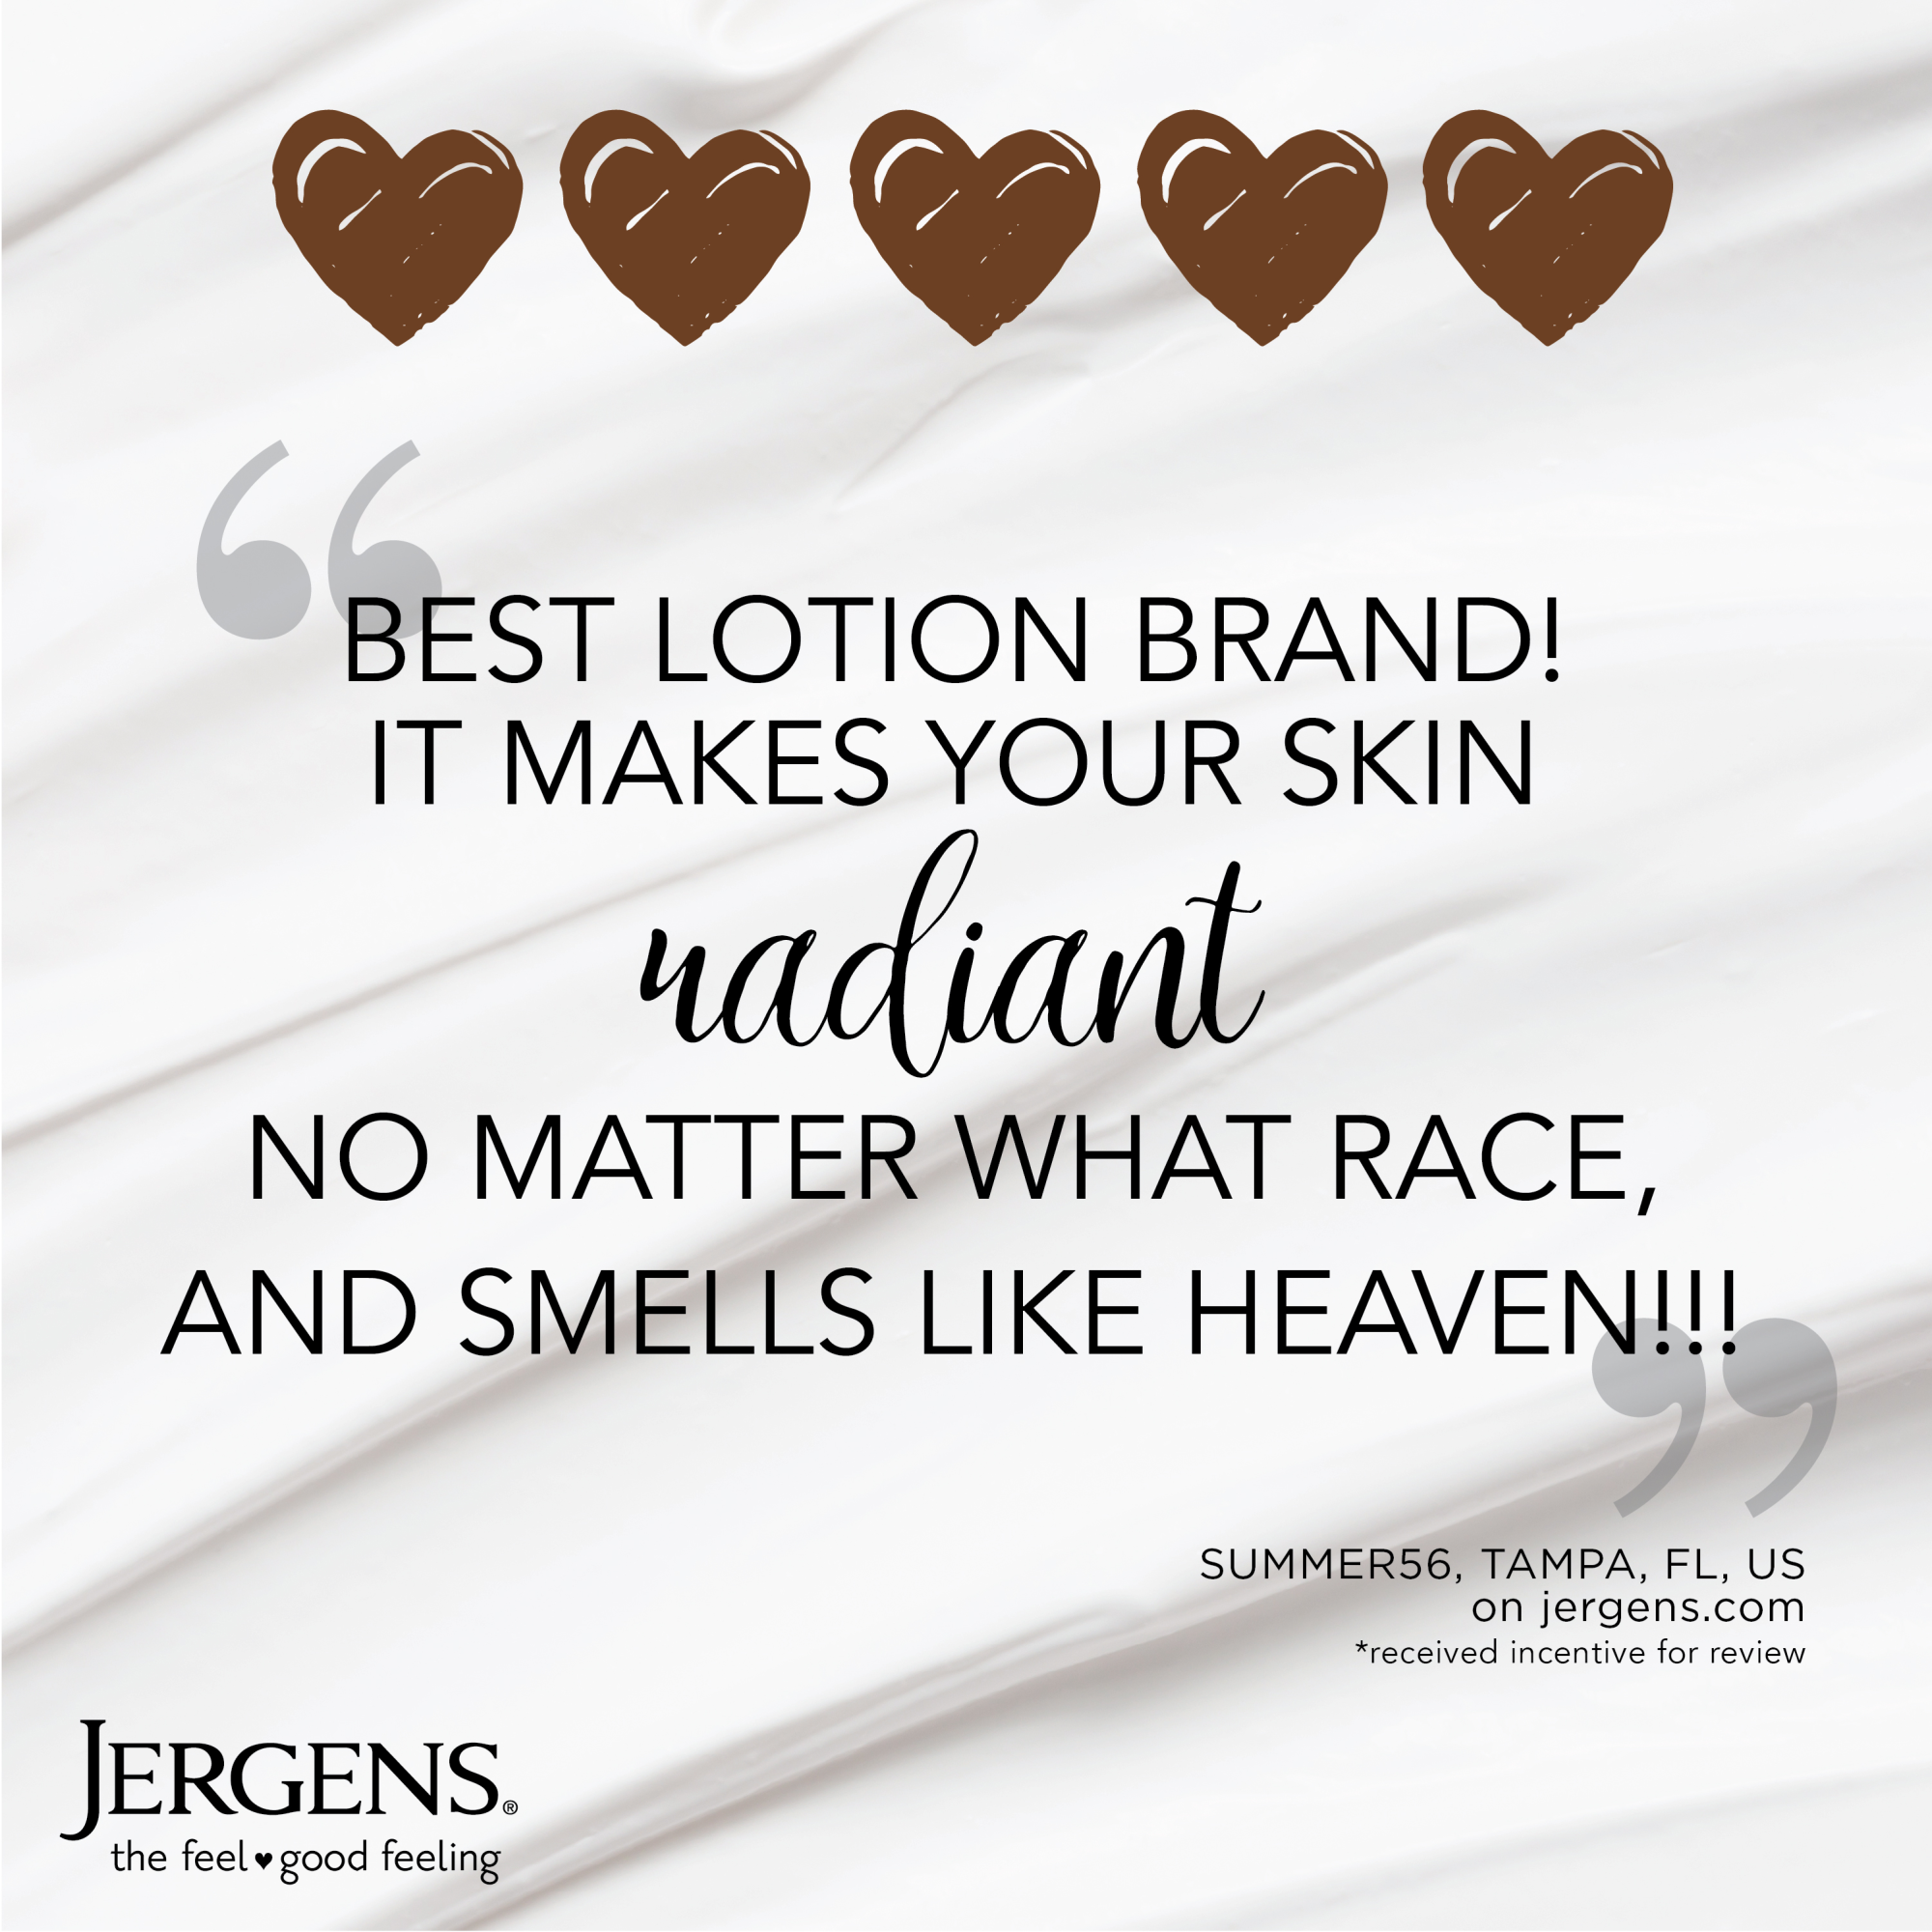 "Best lotion brand! It makes your skin radiant no matter what race, and smells like heaven!!!" Summer56, Tampa, FL, US on jergens.com *received incentive for review.